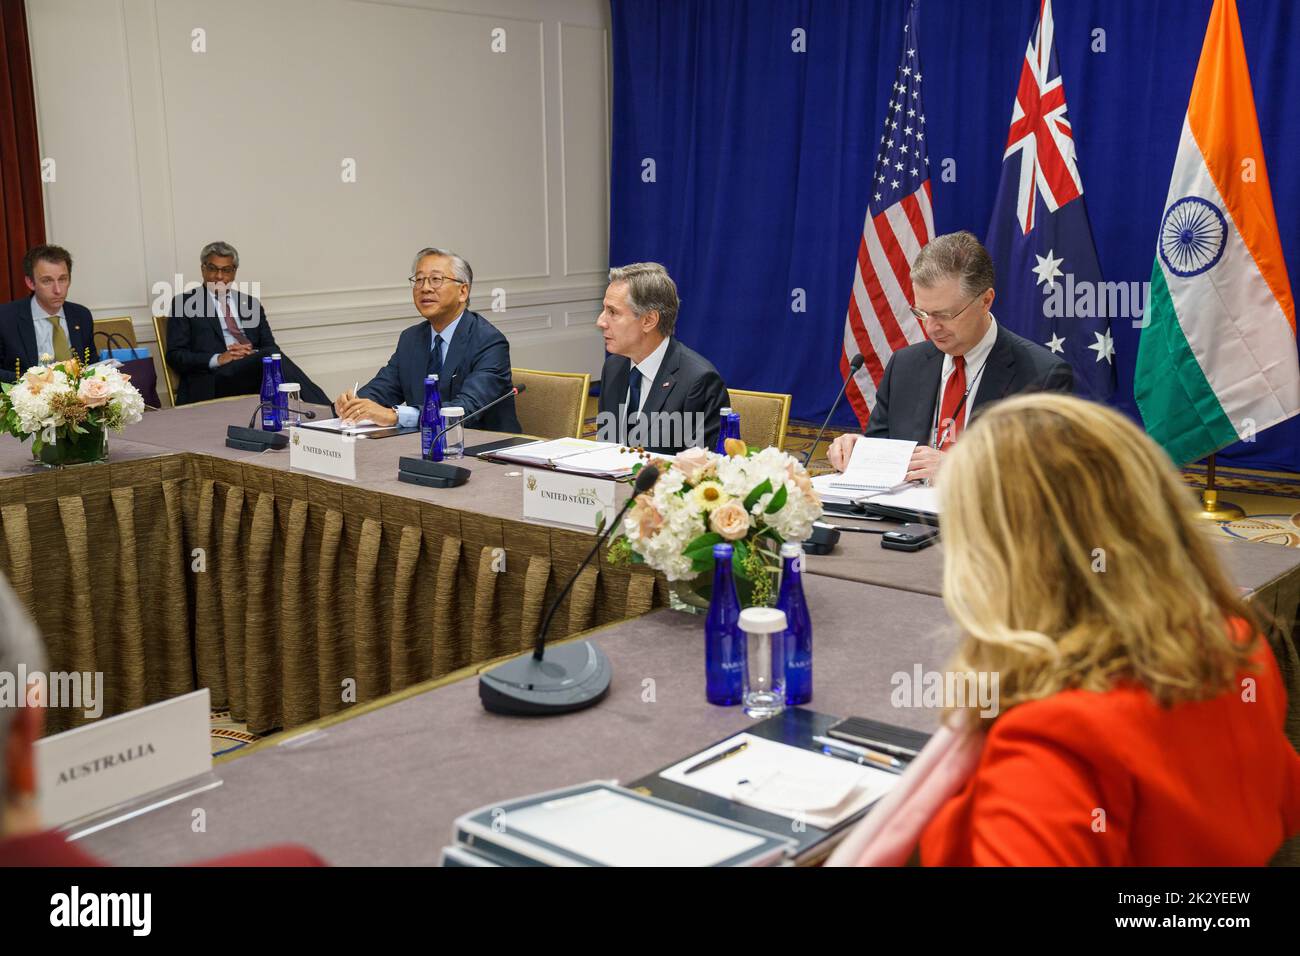 New York City, USA. 23rd Sep, 2022. U.S. Secretary of State Tony Blinken, center, participates in the Indo-Pacific Quad Meeting with Australian Foreign Minister Penny Wong, Indian Foreign Minister Subrahmanyam Jaishankar, and Japanese Foreign Minister Hayashi Yoshimasa on the sidelines of the 77th Session of the U.N General Assembly, September 23, 2022, in New York City. Credit: Ron Przysucha/State Department Photo/Alamy Live News Stock Photo